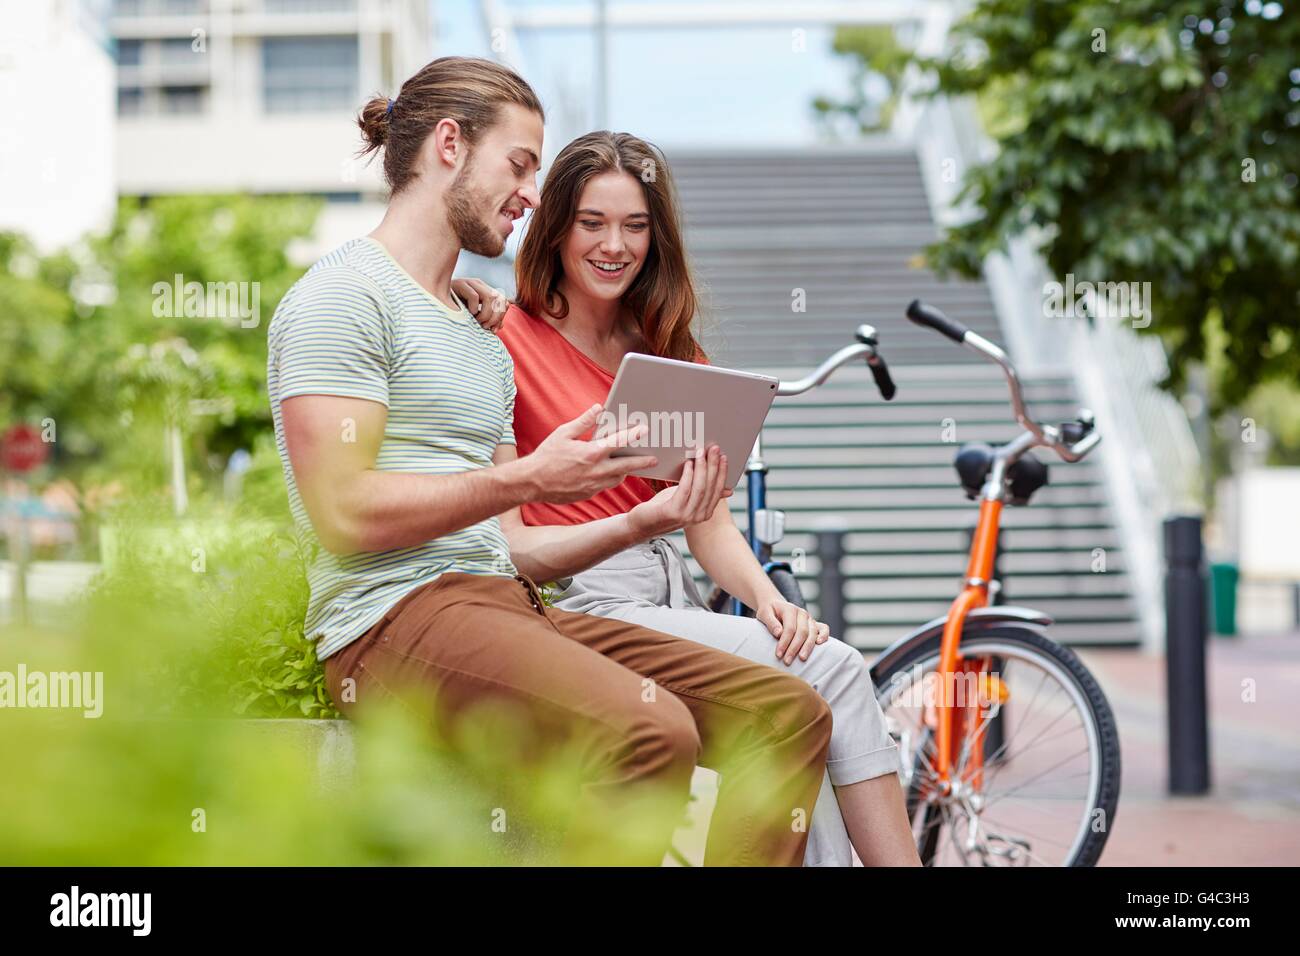 Parution du modèle. Young couple sitting on wall with digital tablet. Banque D'Images